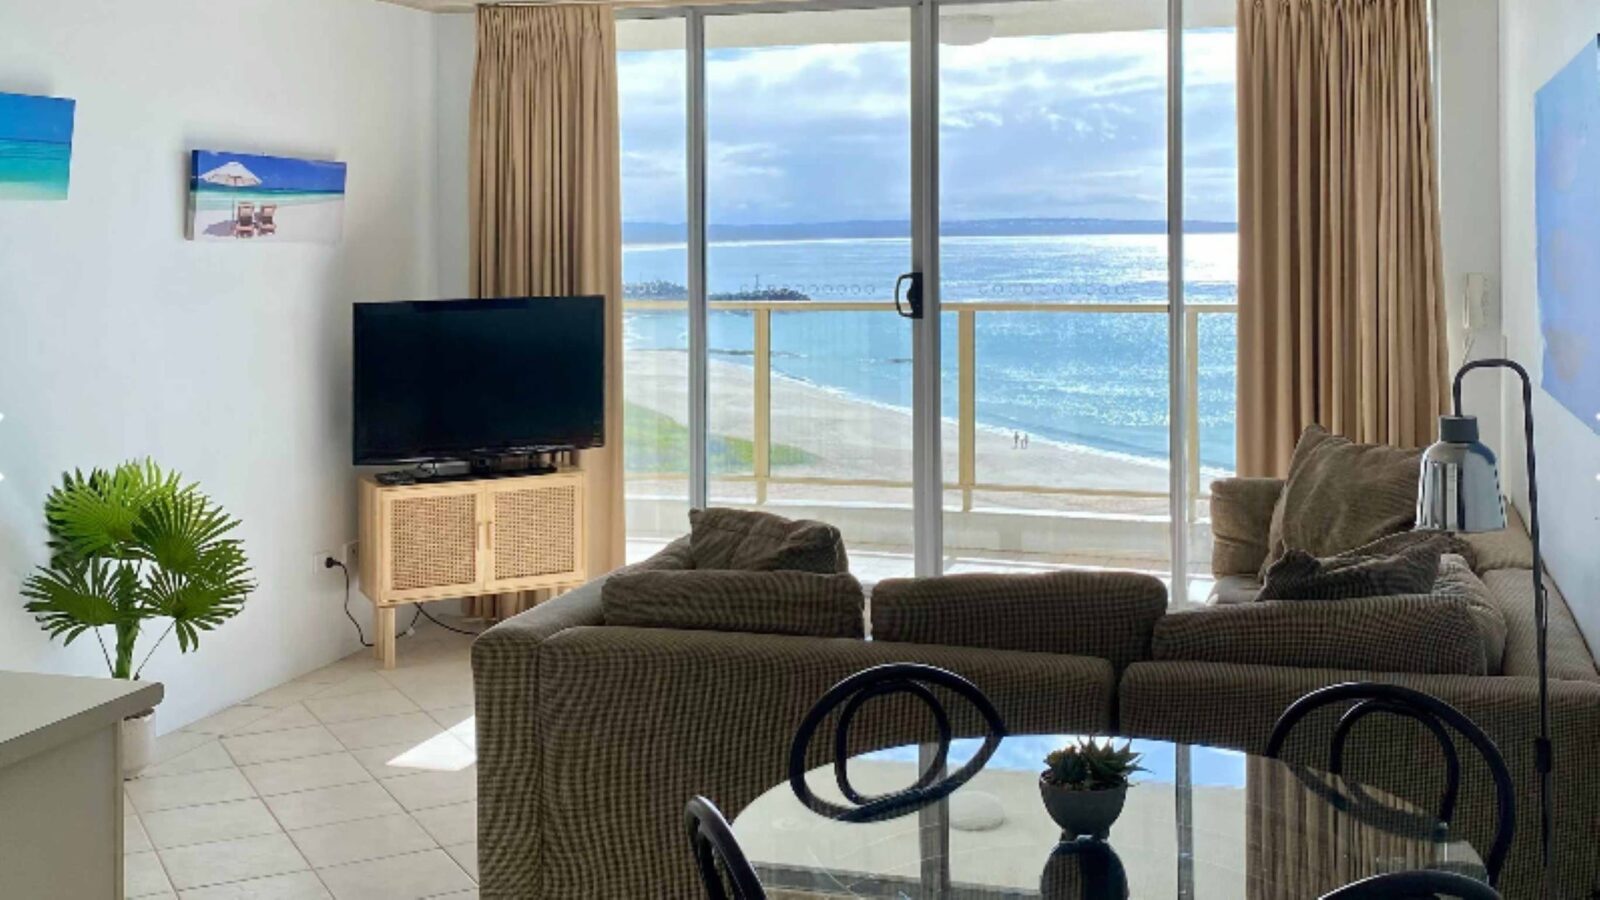 Lounge room with lounges, TV and stunning beach views